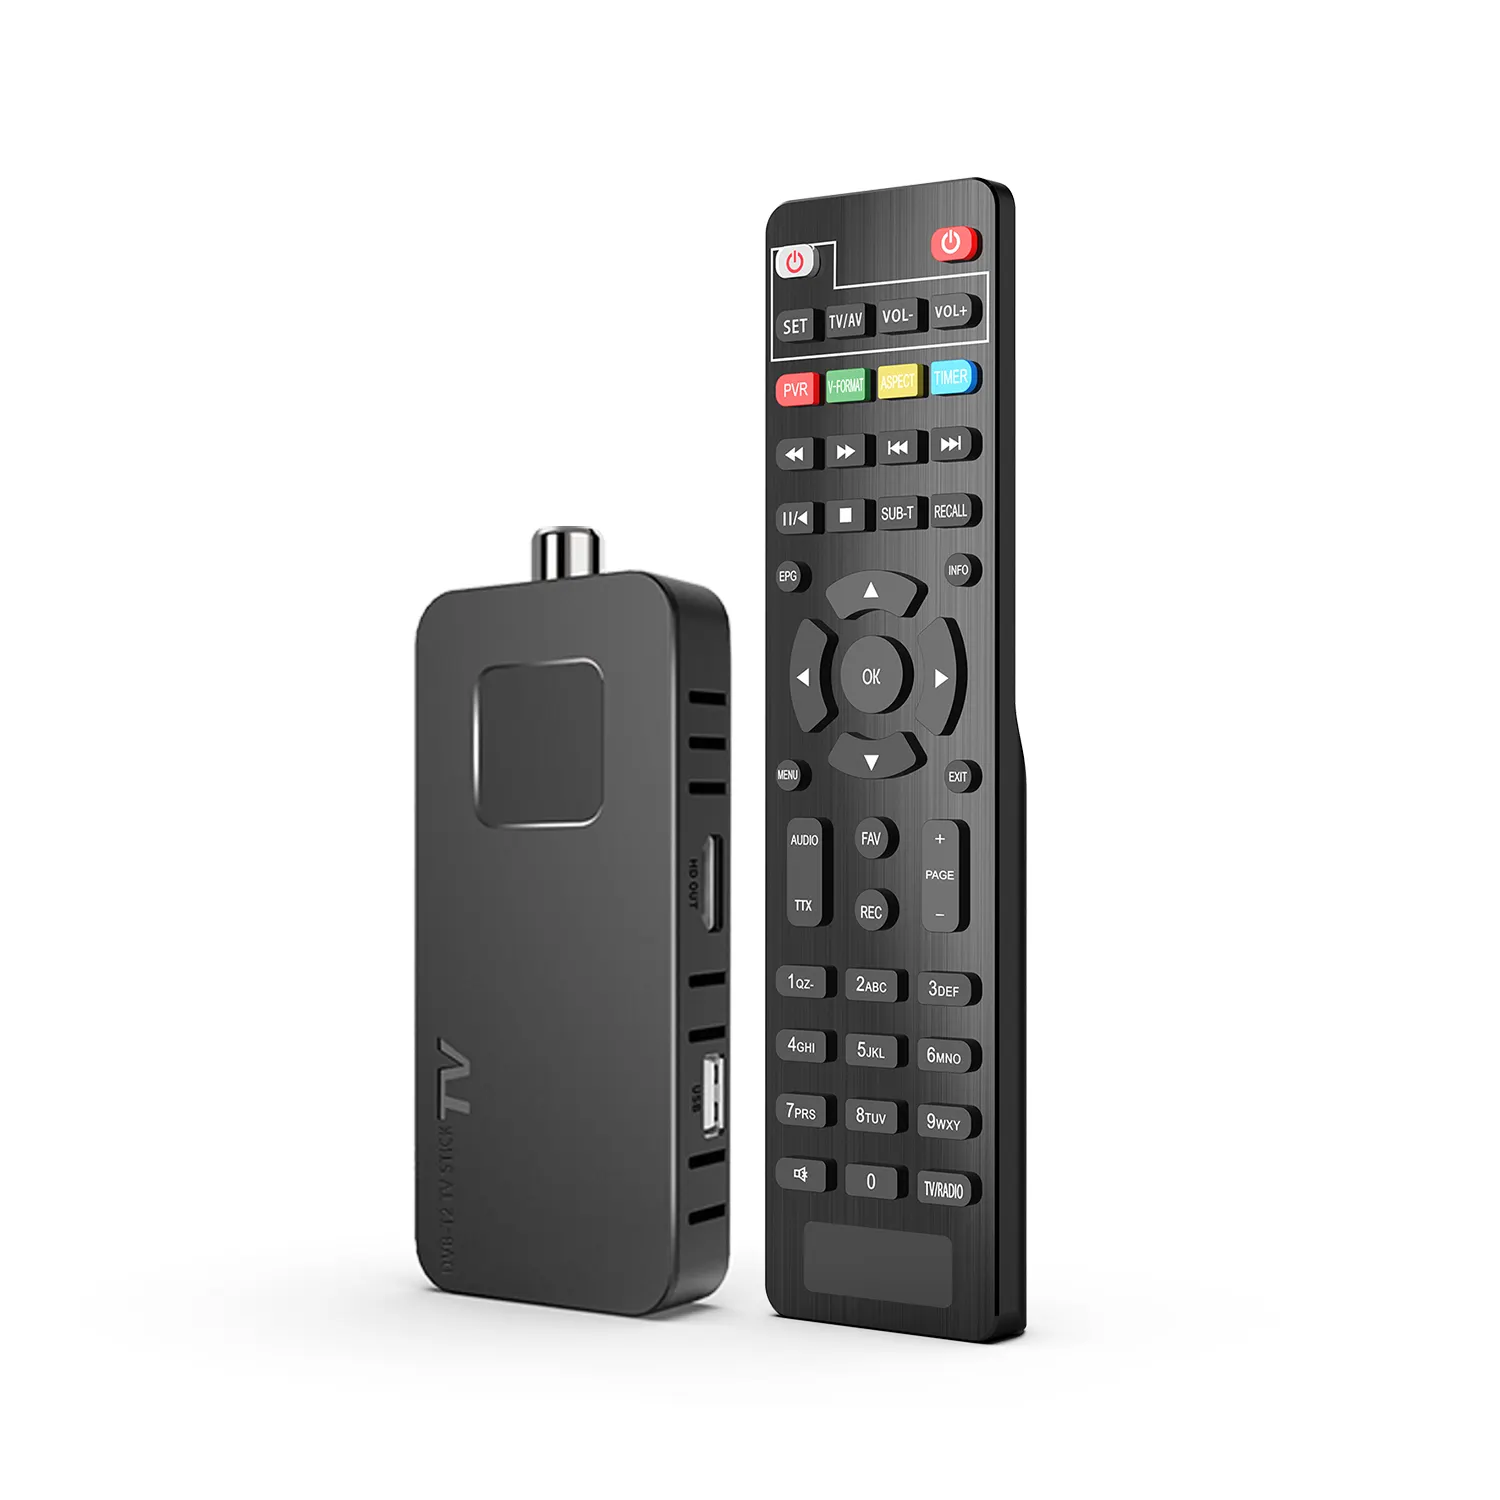 2022 nuovo Smart Tv Box HEVC 10bit H.265 <span class=keywords><strong>ricevitore</strong></span> TV digitale mini <span class=keywords><strong>USB</strong></span> TV Fire Stick <span class=keywords><strong>DVB</strong></span> T2